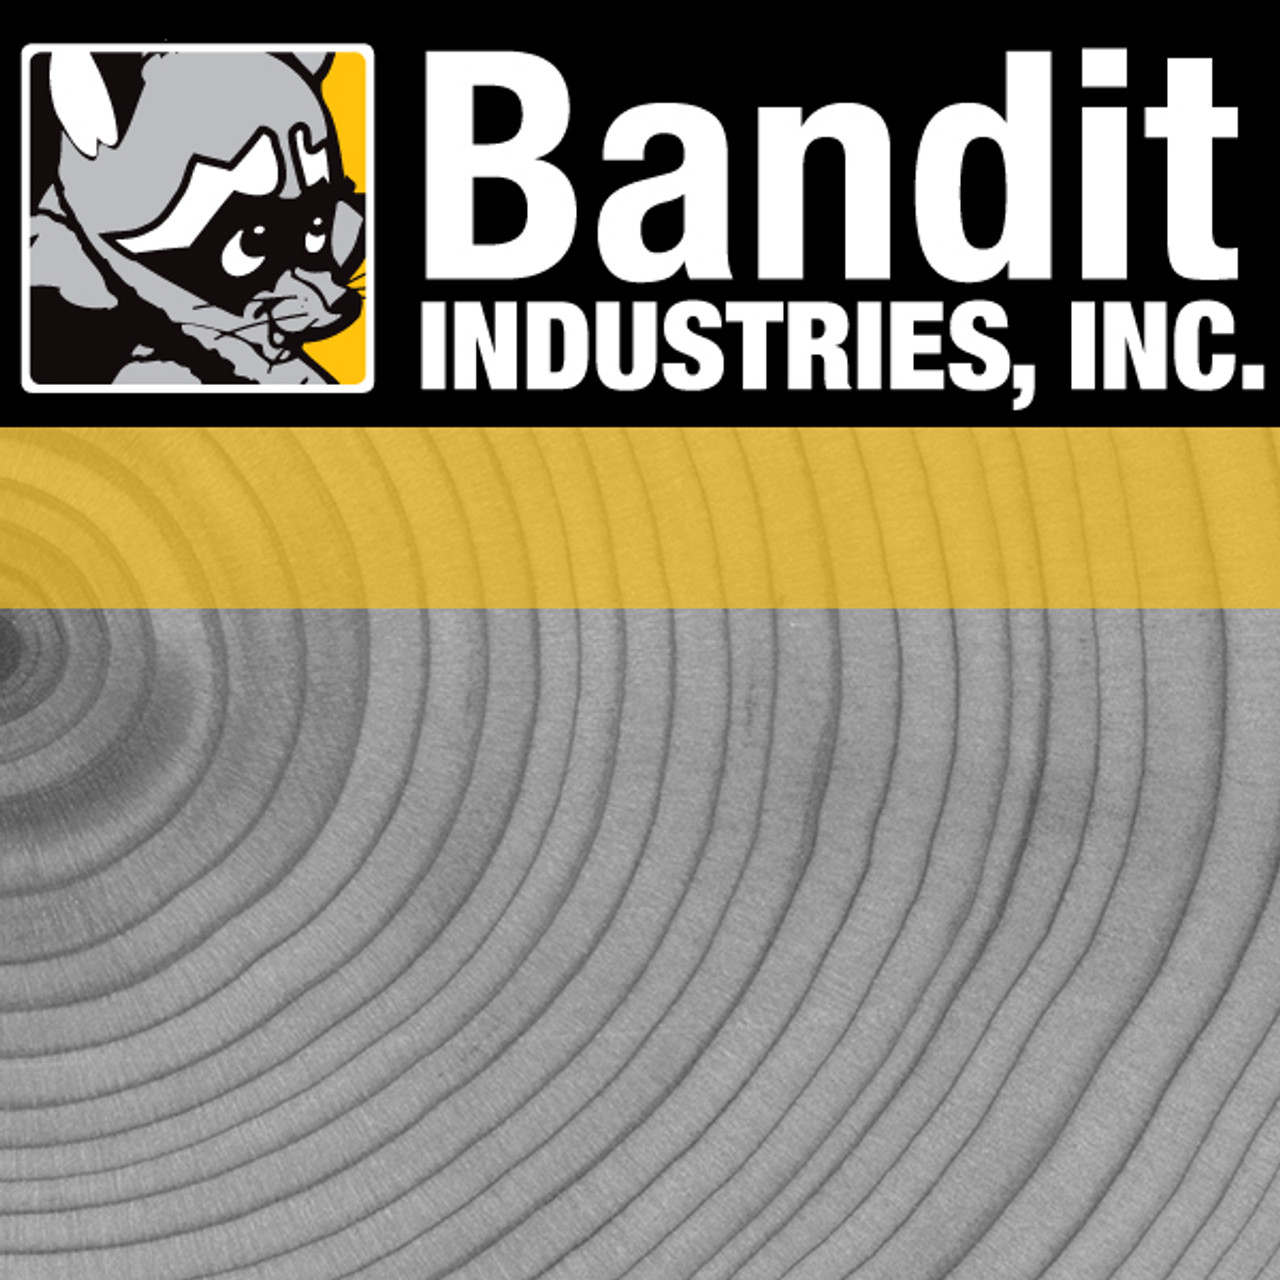 900-4905-29: BANDIT BOLT FOR COUNTER KNIFE M-1900 1/4""-20NC X 5/8 1900